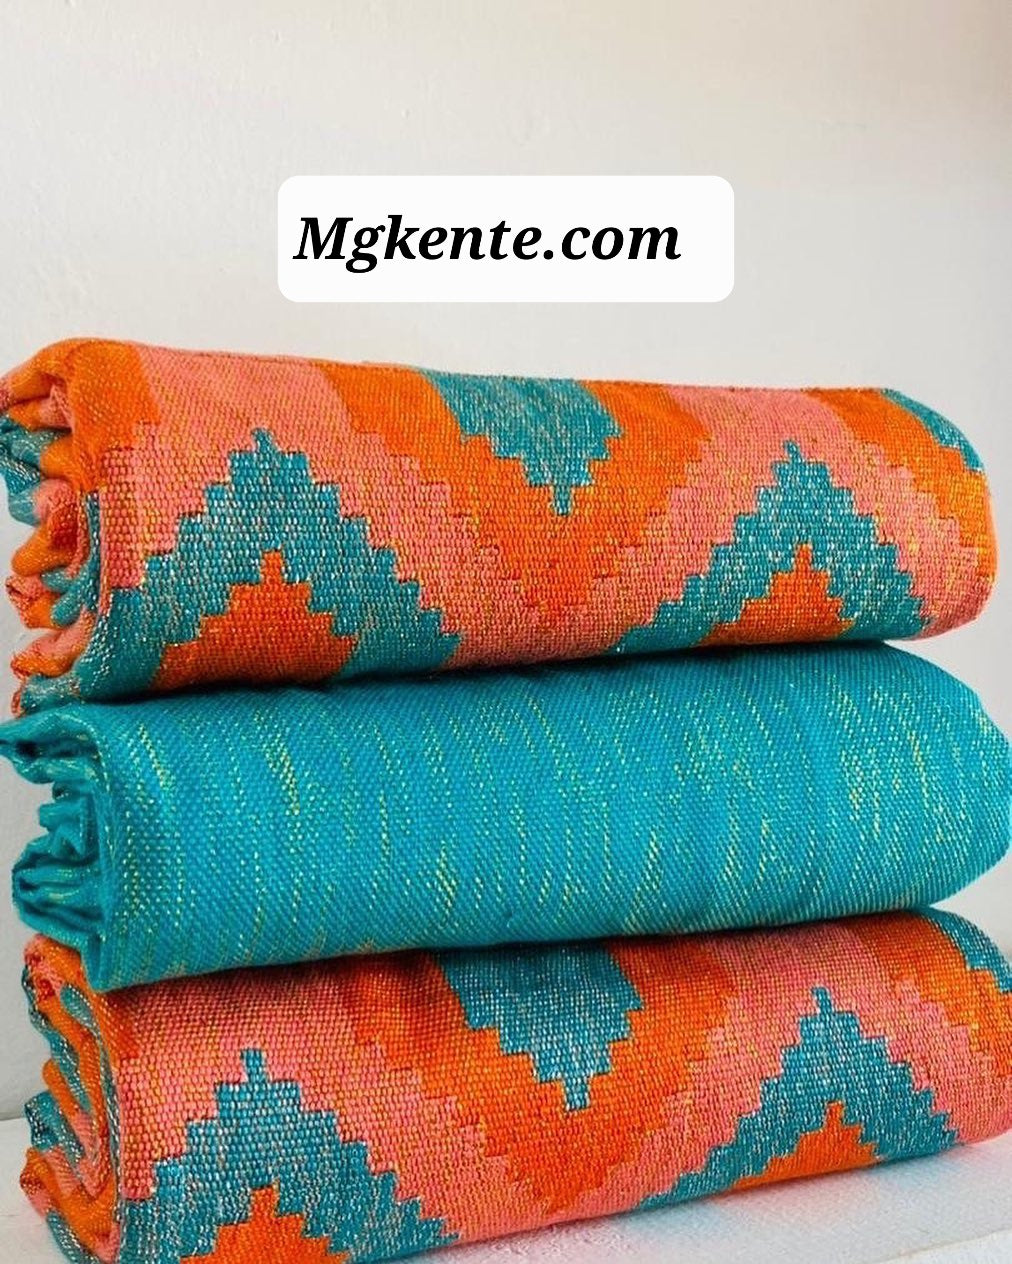 Authentic Hand Weaved Kente Cloth A2329